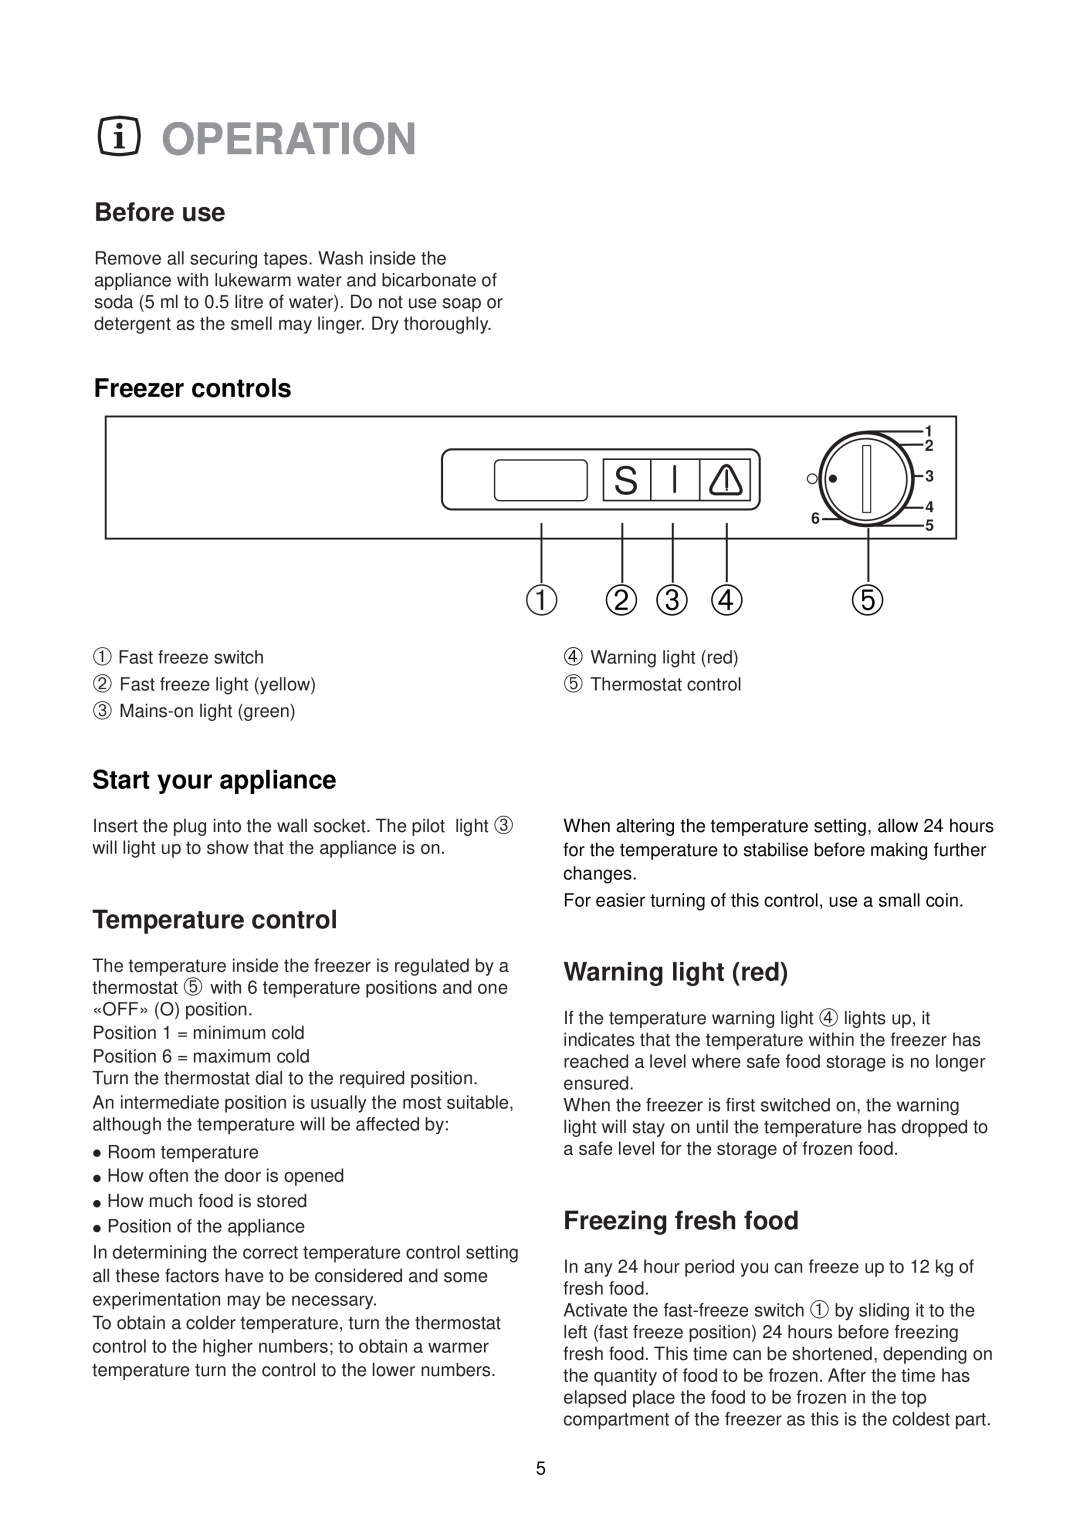 Zanussi ZVR 45 R Operation, Before use, Freezer controls, Start your appliance, Temperature control, Warning light red 